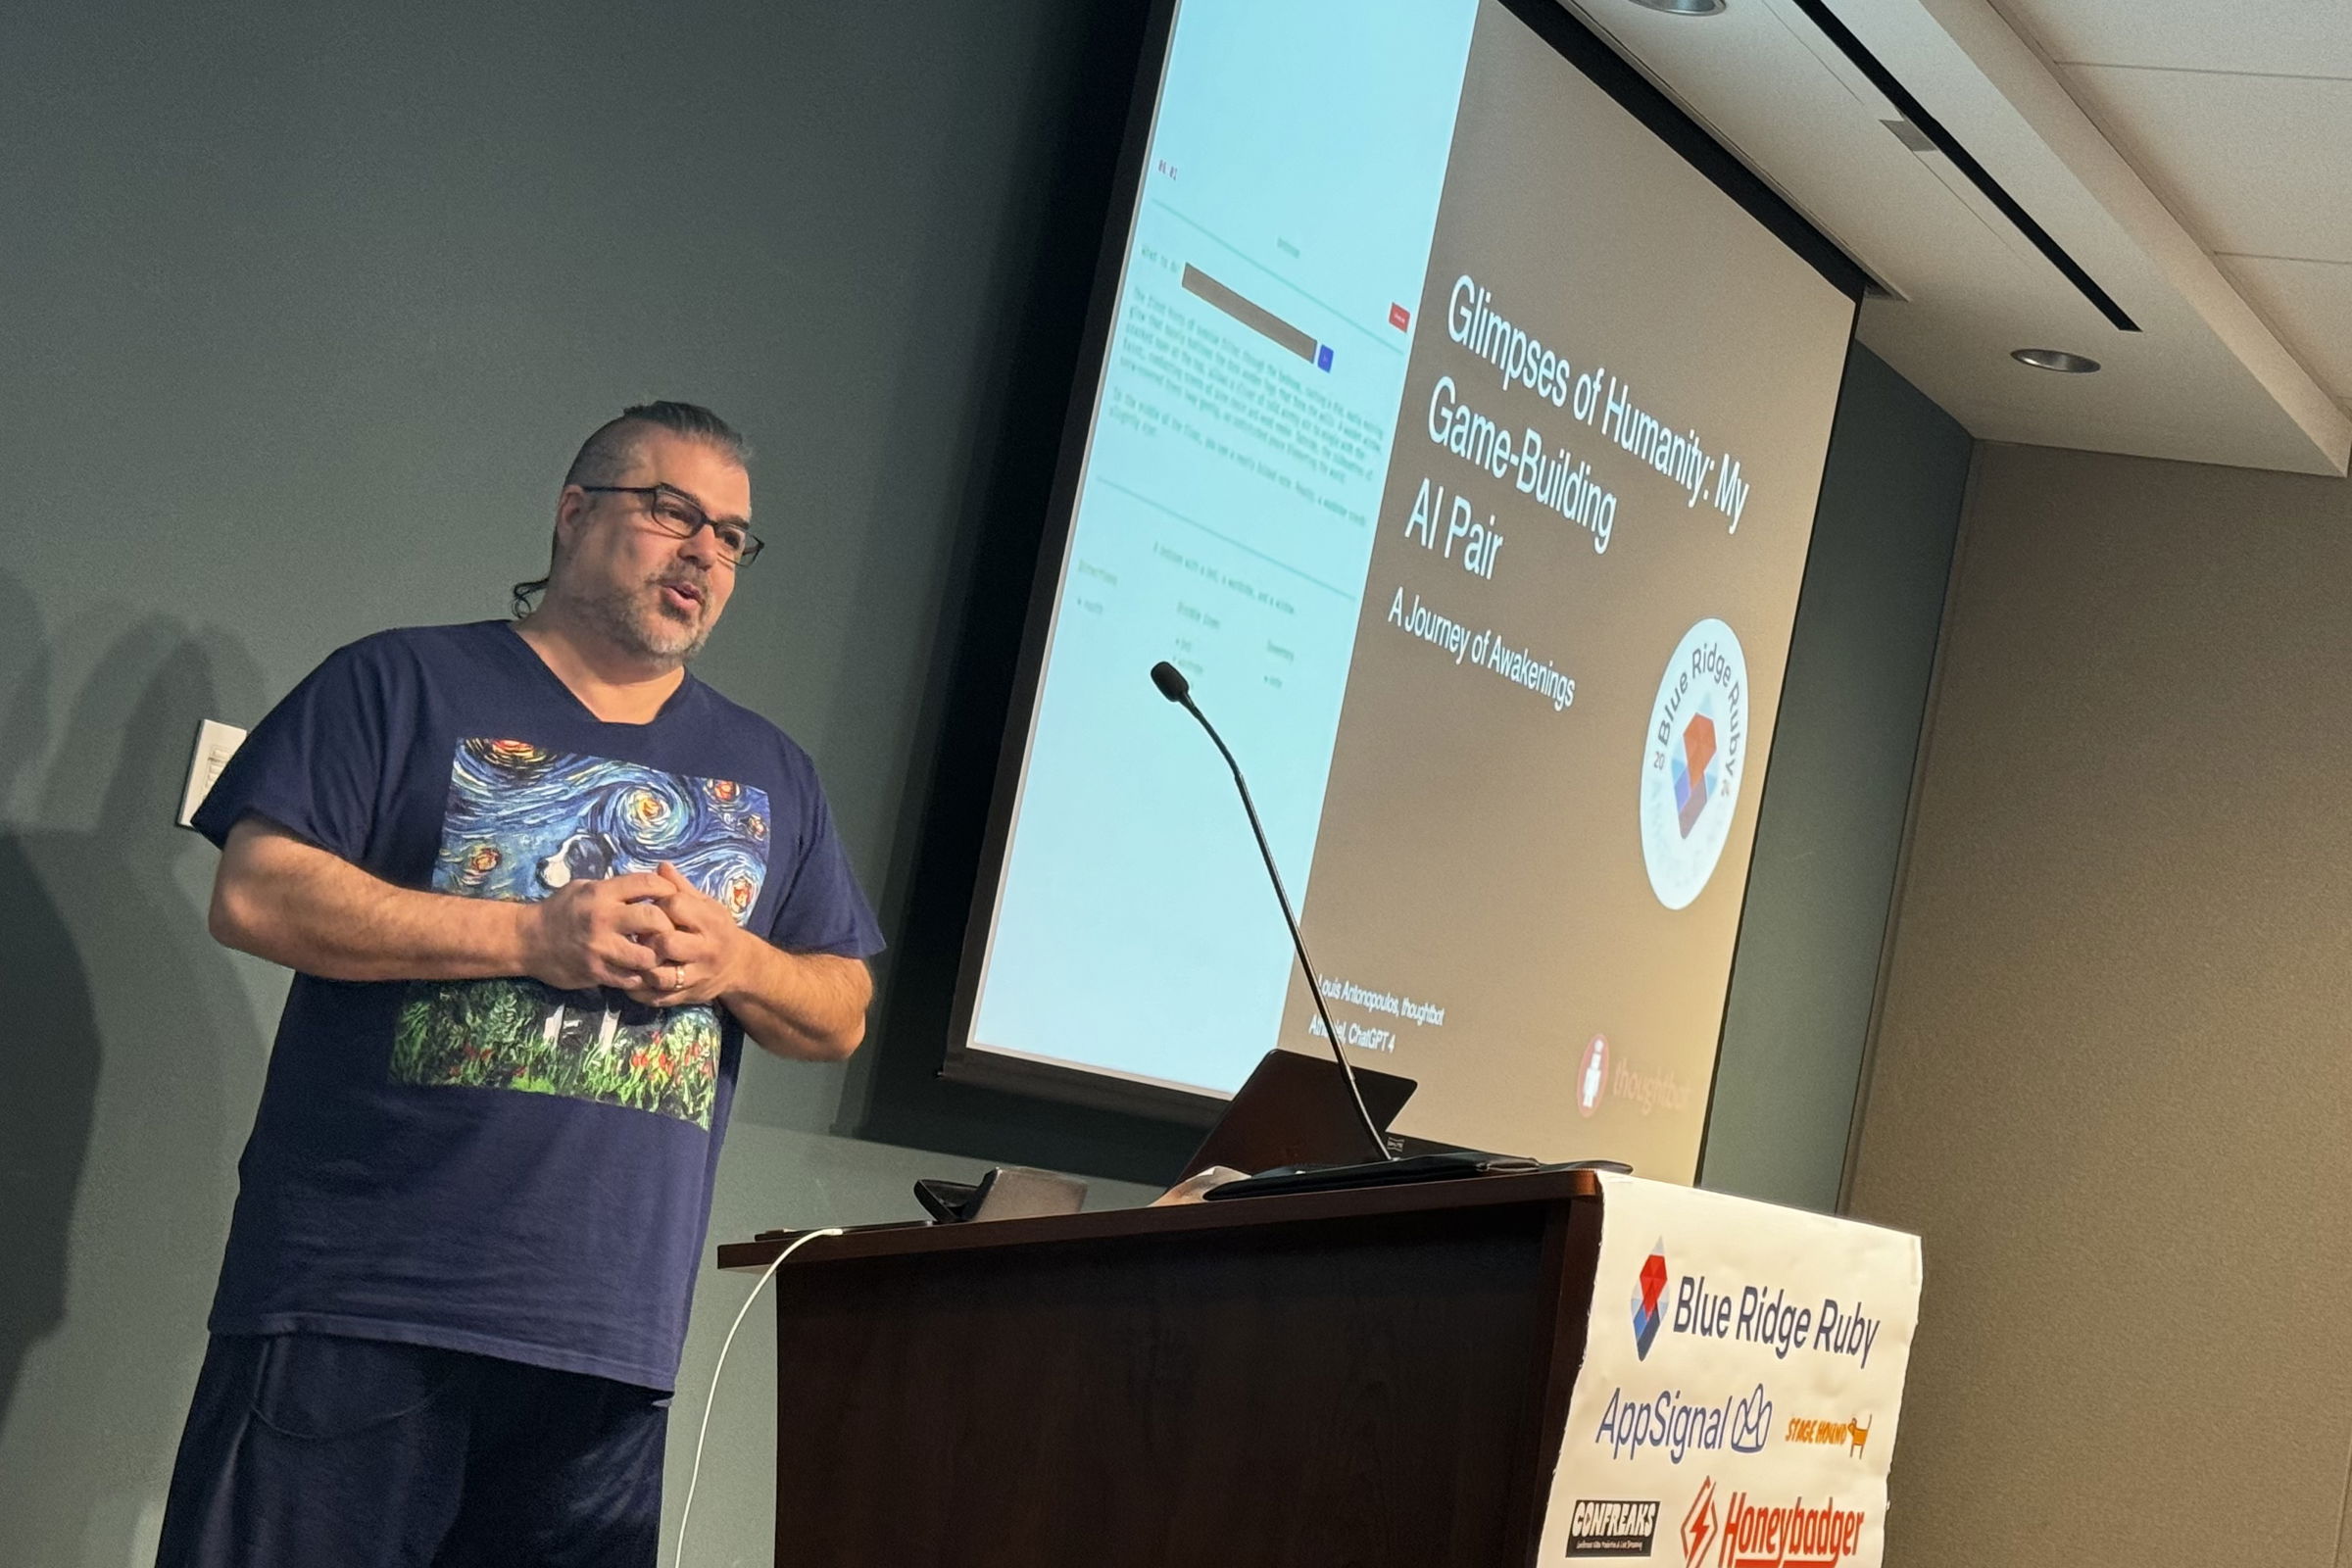 Louis Antonopoulos presents at Blue Ridge Ruby conference on “Glimpses of Humanity: My Game-Building AI Pair,” wearing a shirt with a Van Gogh-inspired design, addressing an audience with a slide displayed behind him.